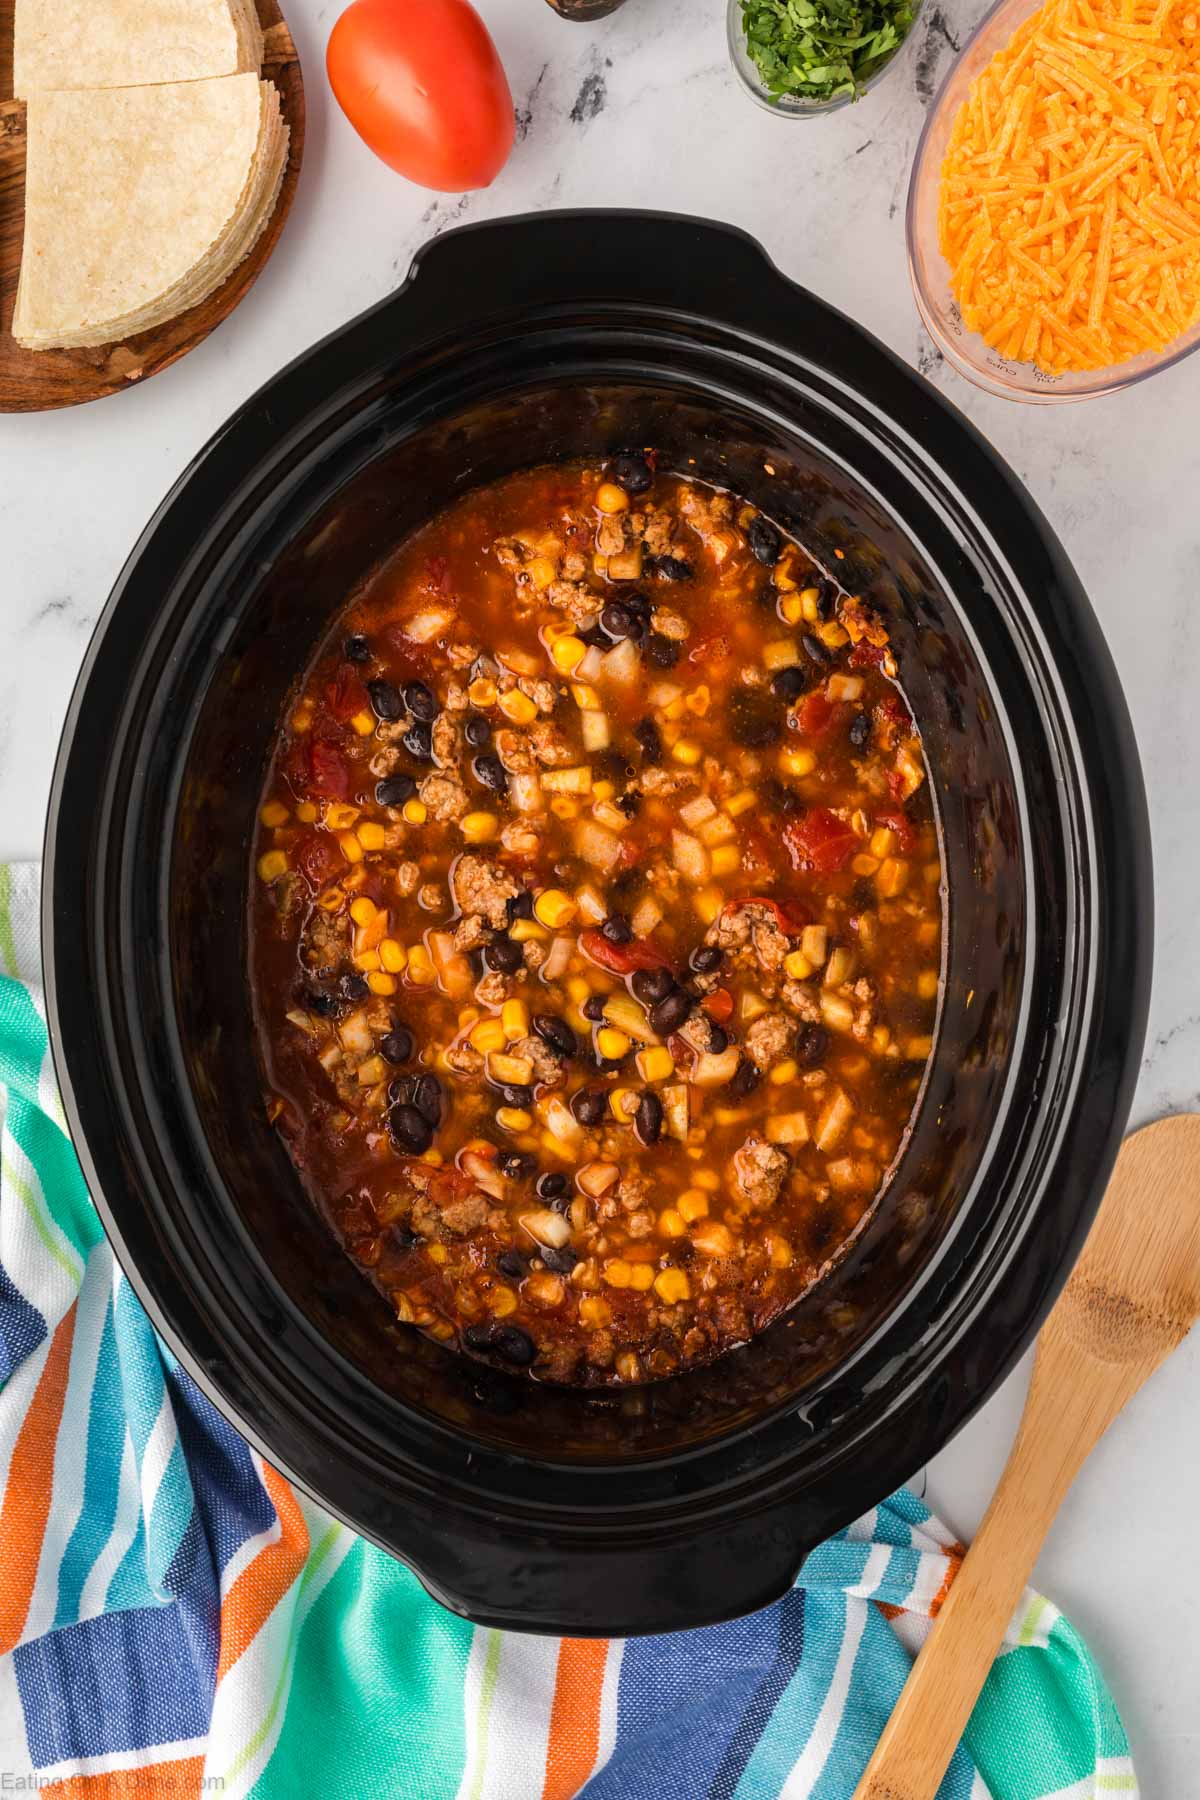 Stirring the Mexican Casserole ingredients in a slow cooker